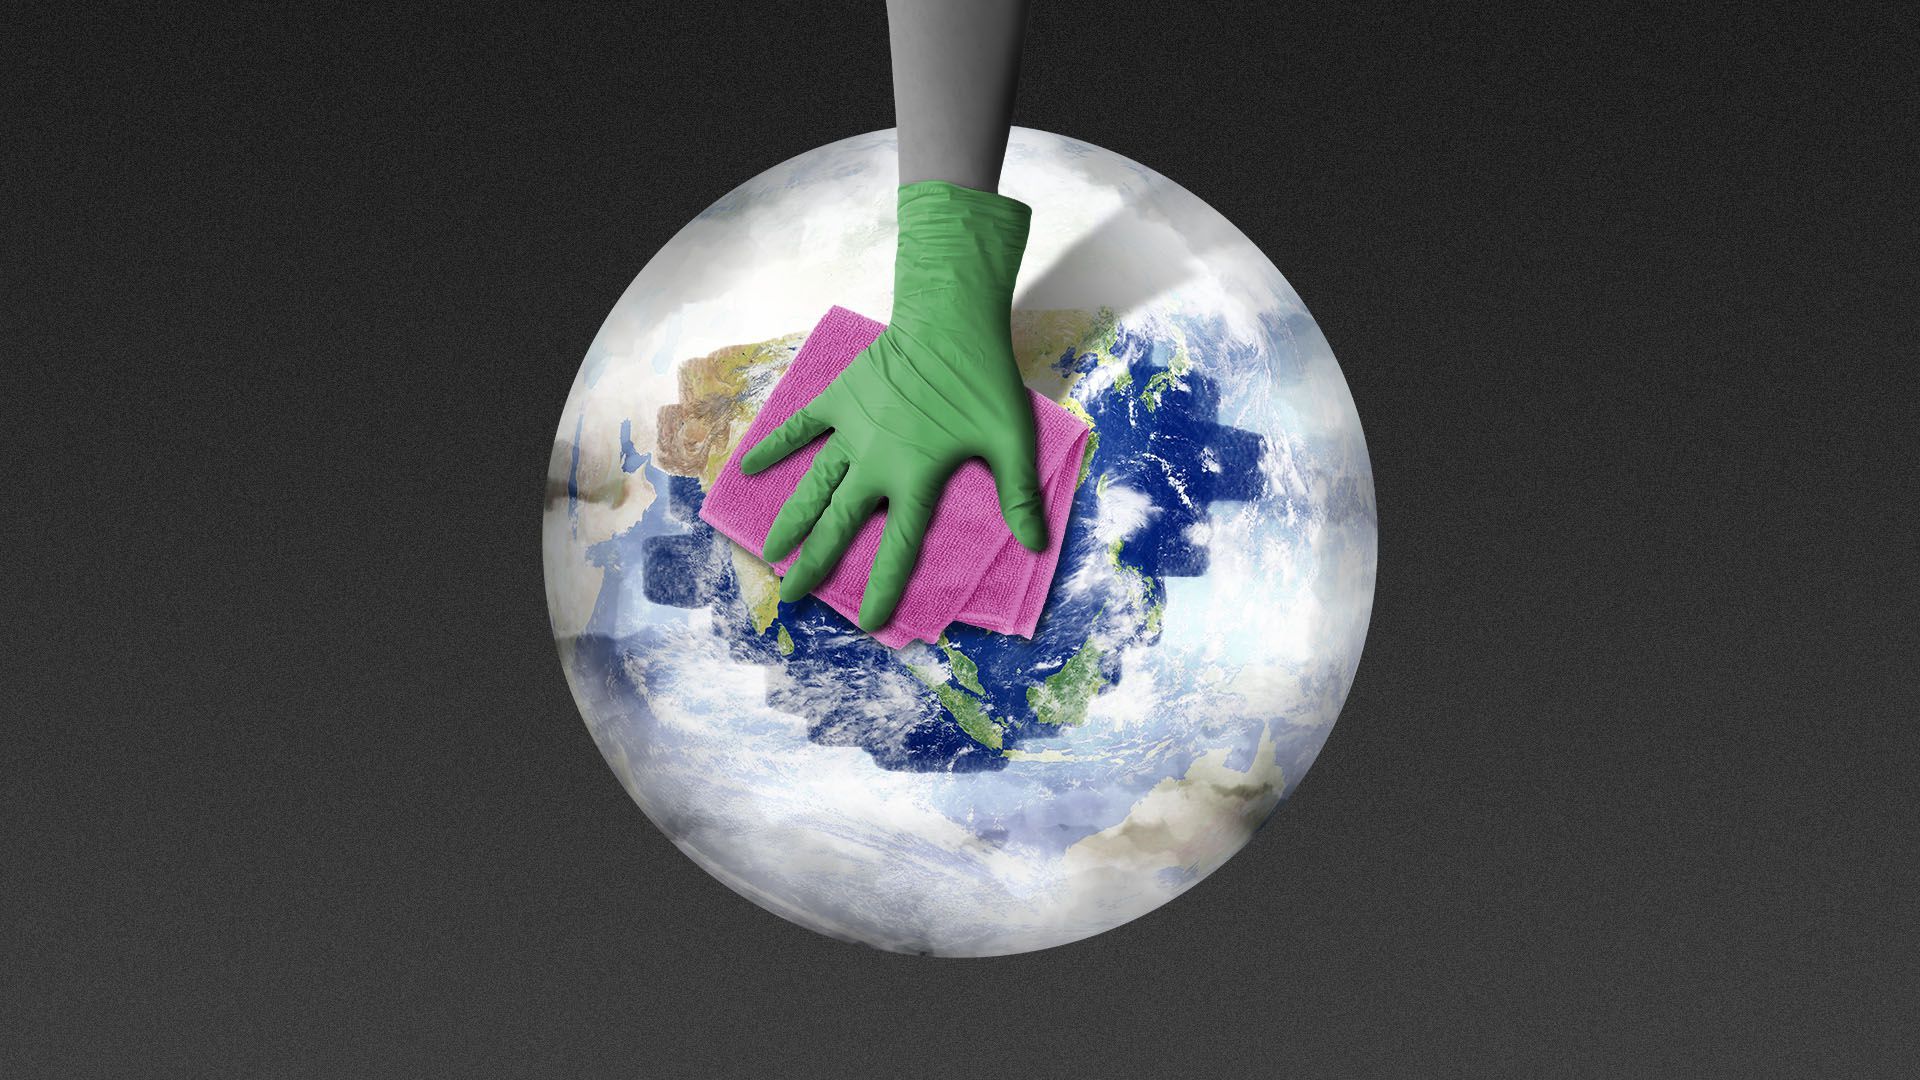 Illustration of a hand with a medical glove wiping a clear spot on a foggy earth